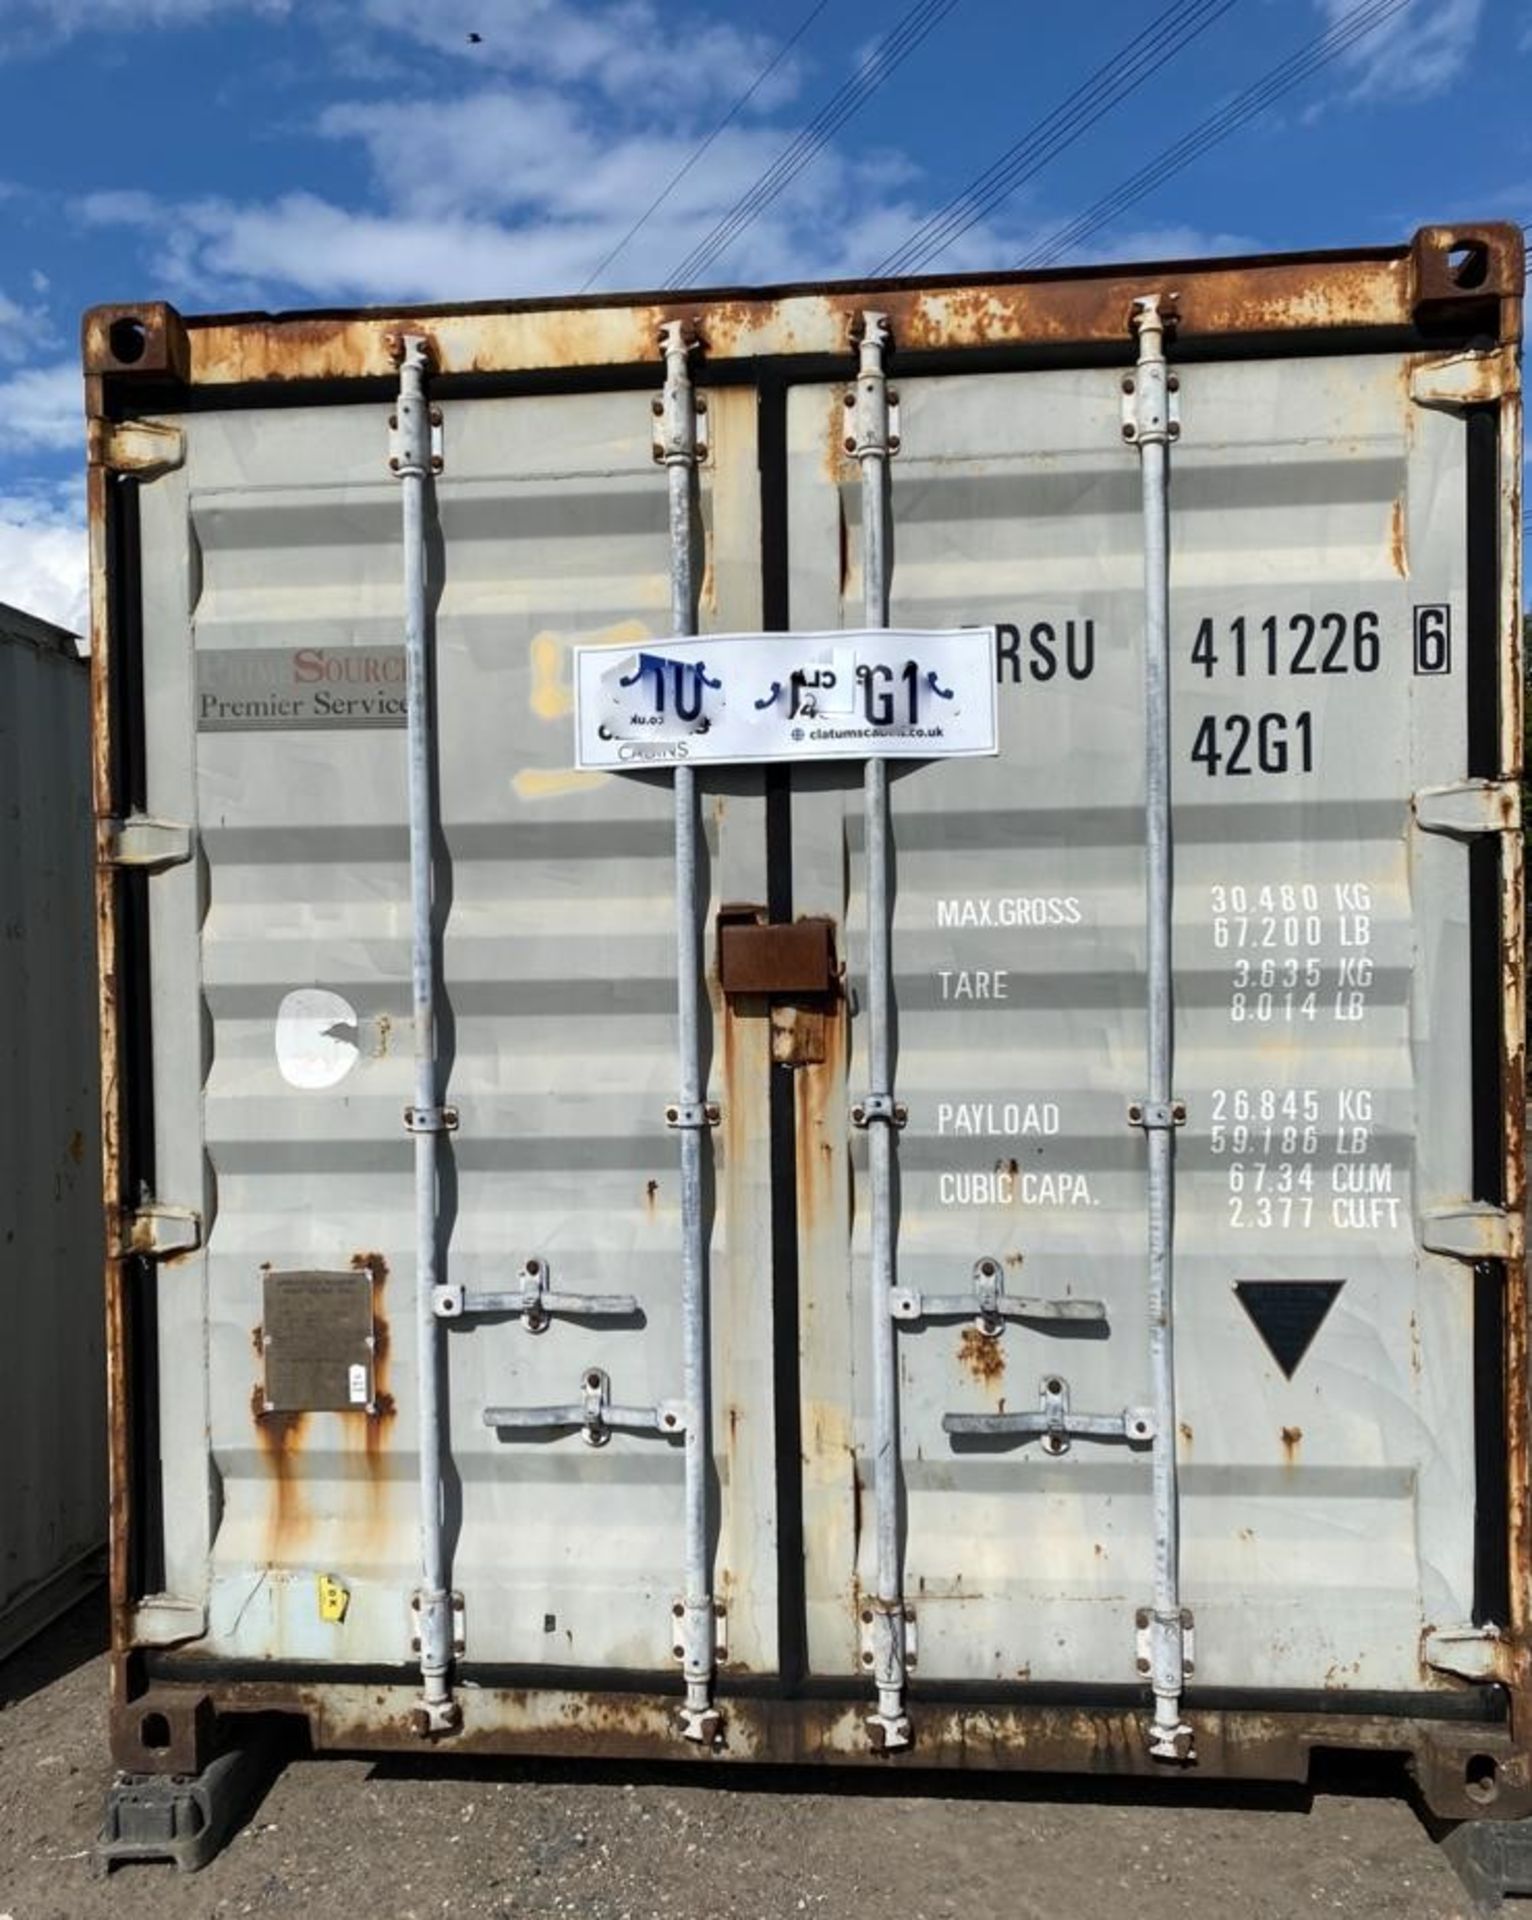 40ft x 8ft storage container shipping container - Image 2 of 7